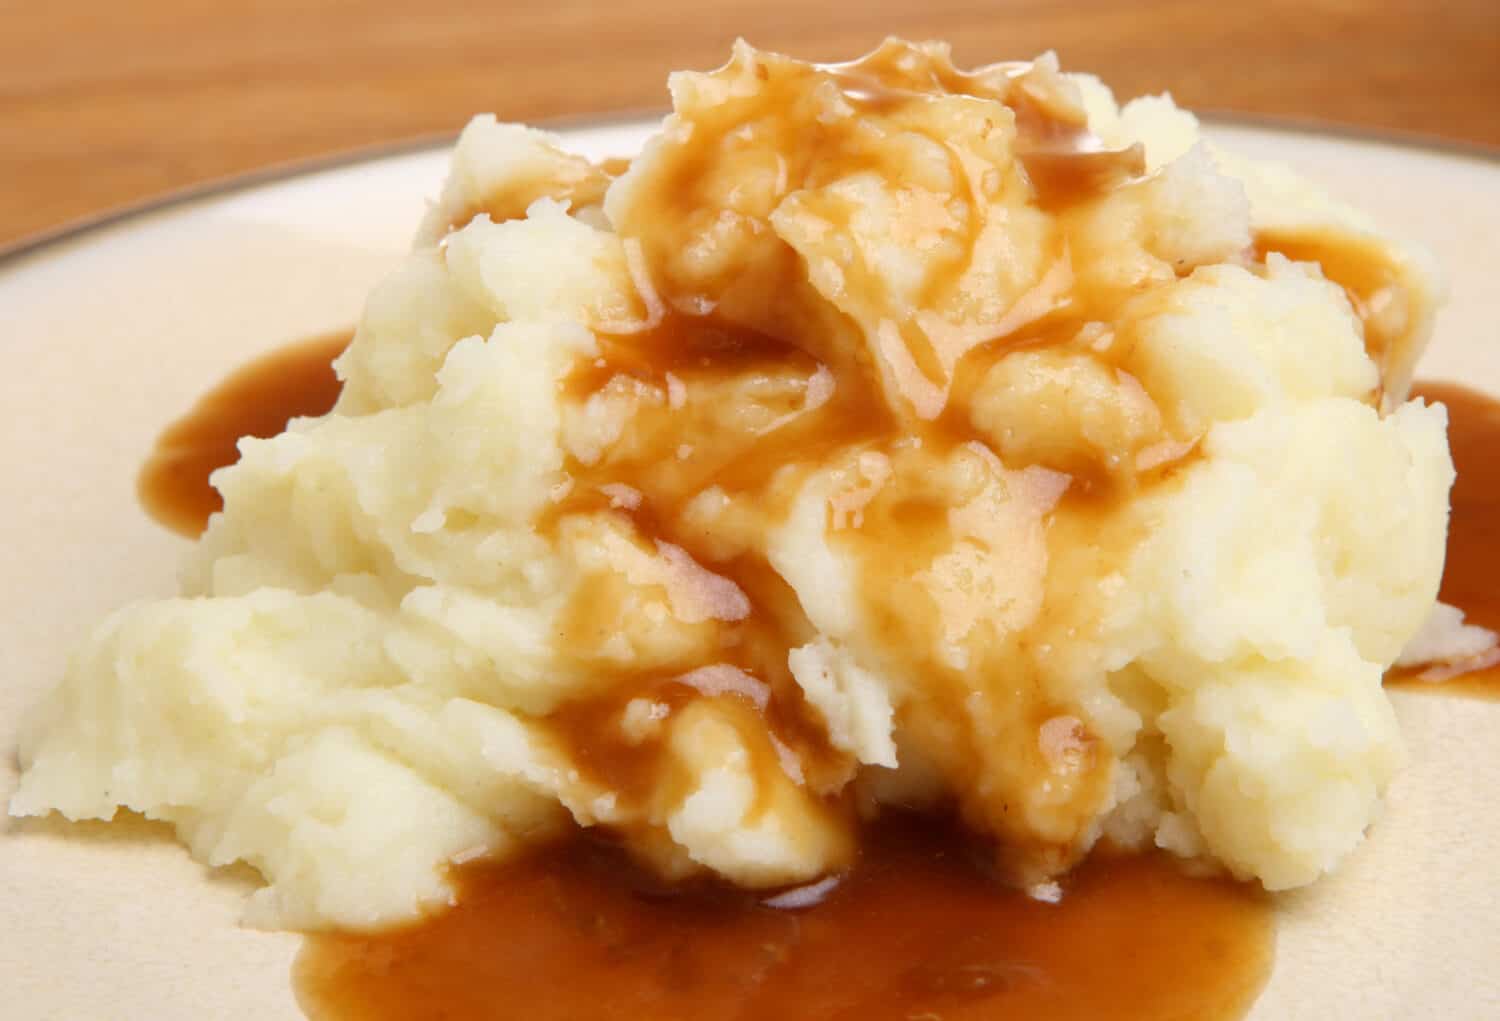 Mashed potato with gravy poured over.